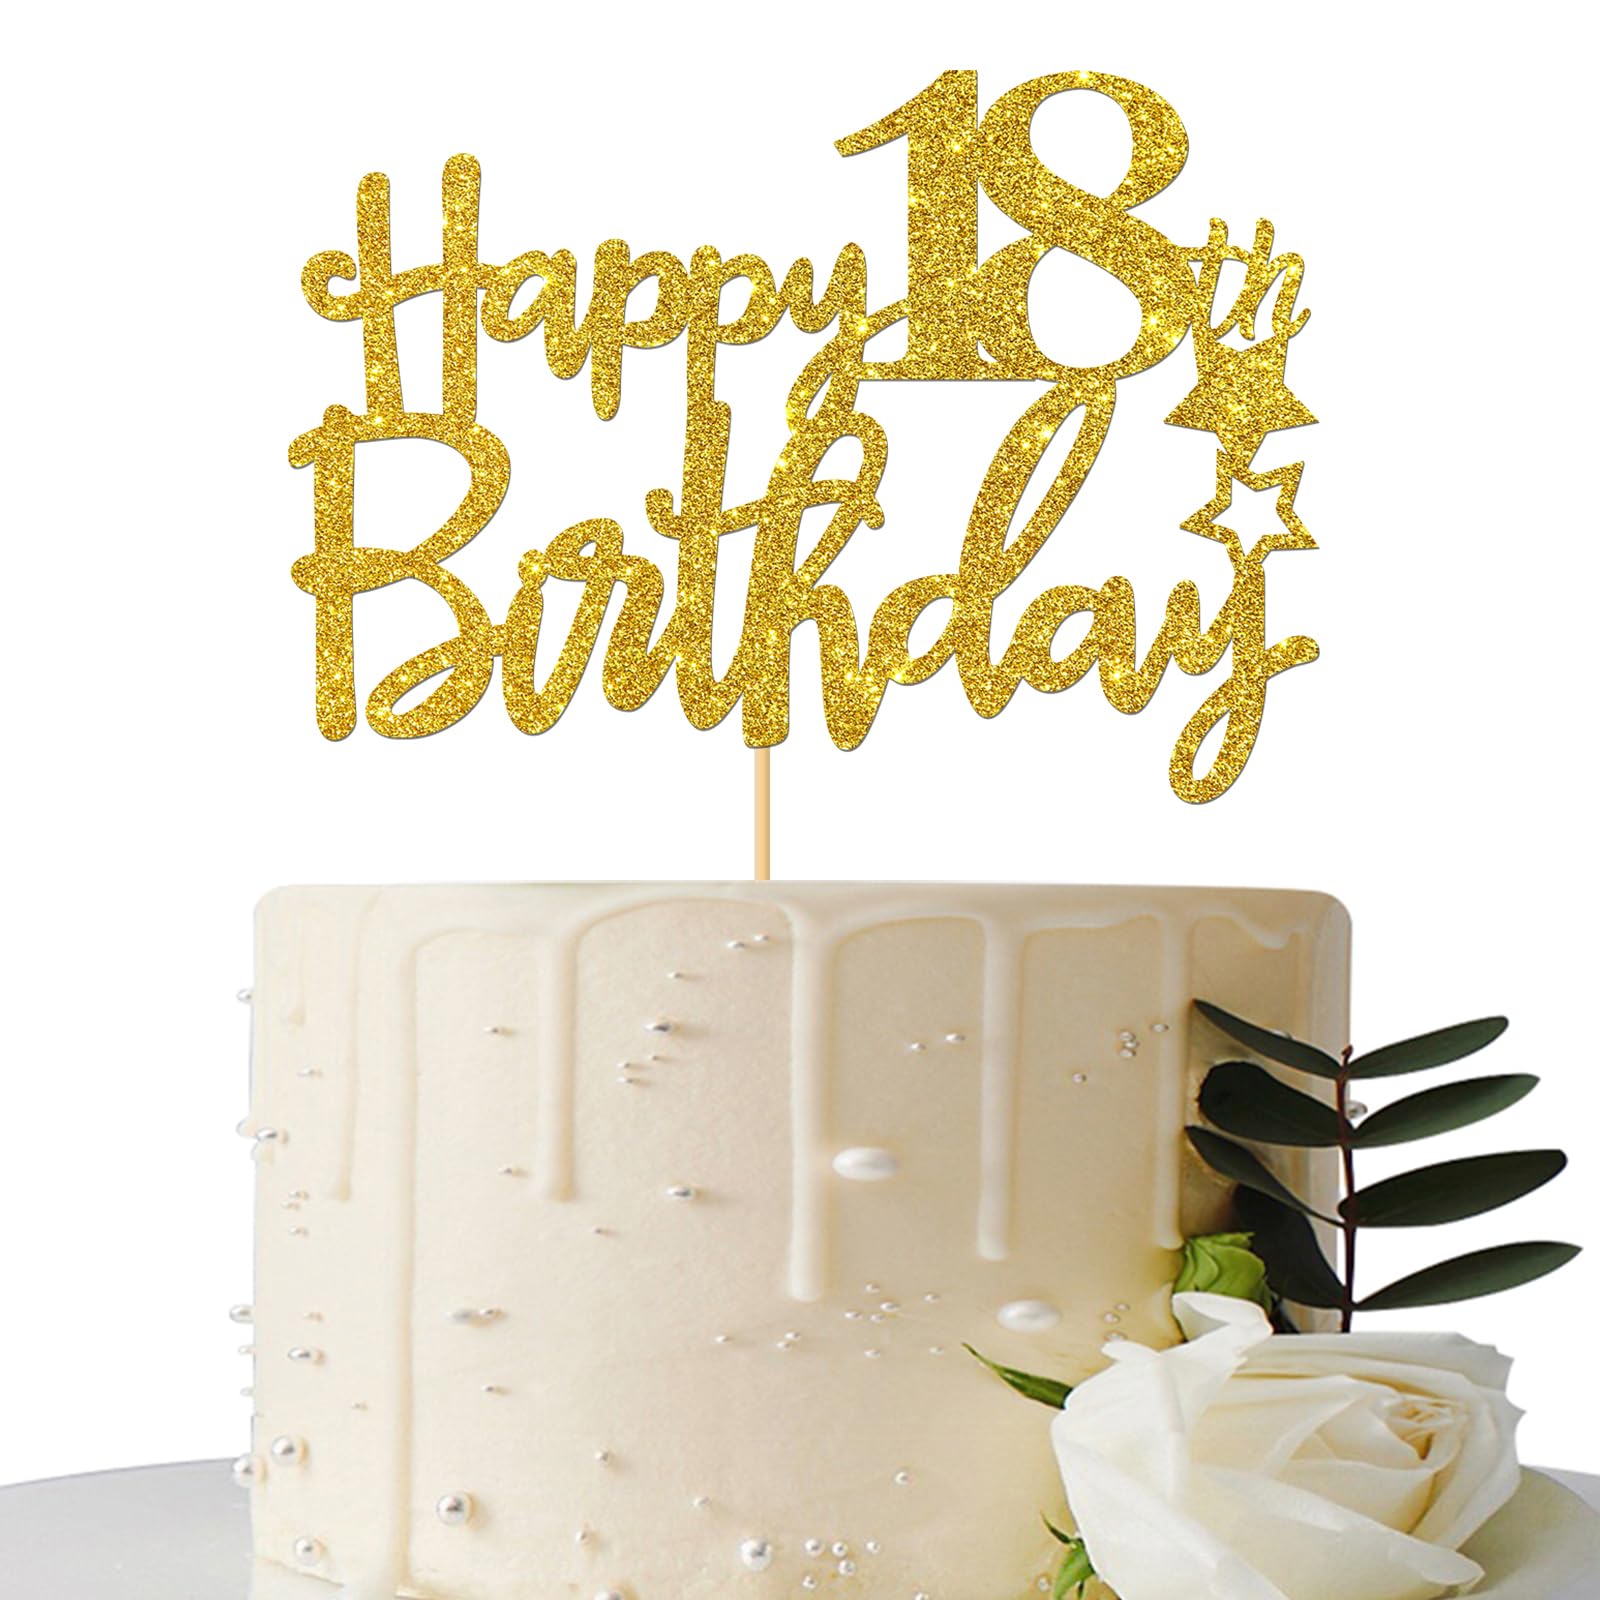 496 18th Birthday Cake Images, Stock Photos & Vectors | Shutterstock